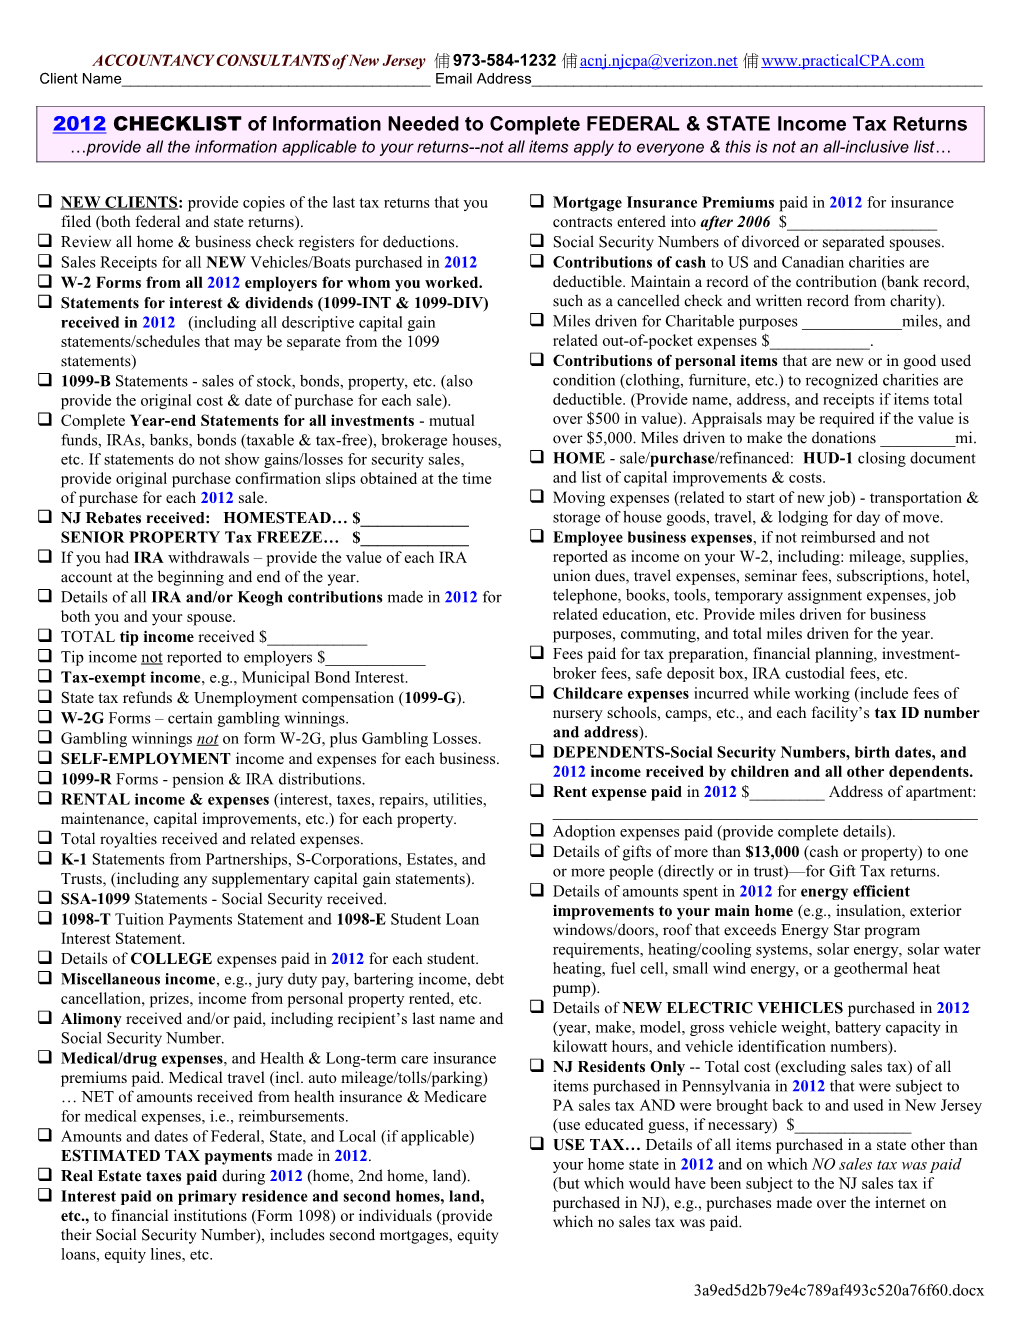 2008 CHECKLIST of Information Needed to Complete FEDERAL & STATE Income Tax Returns